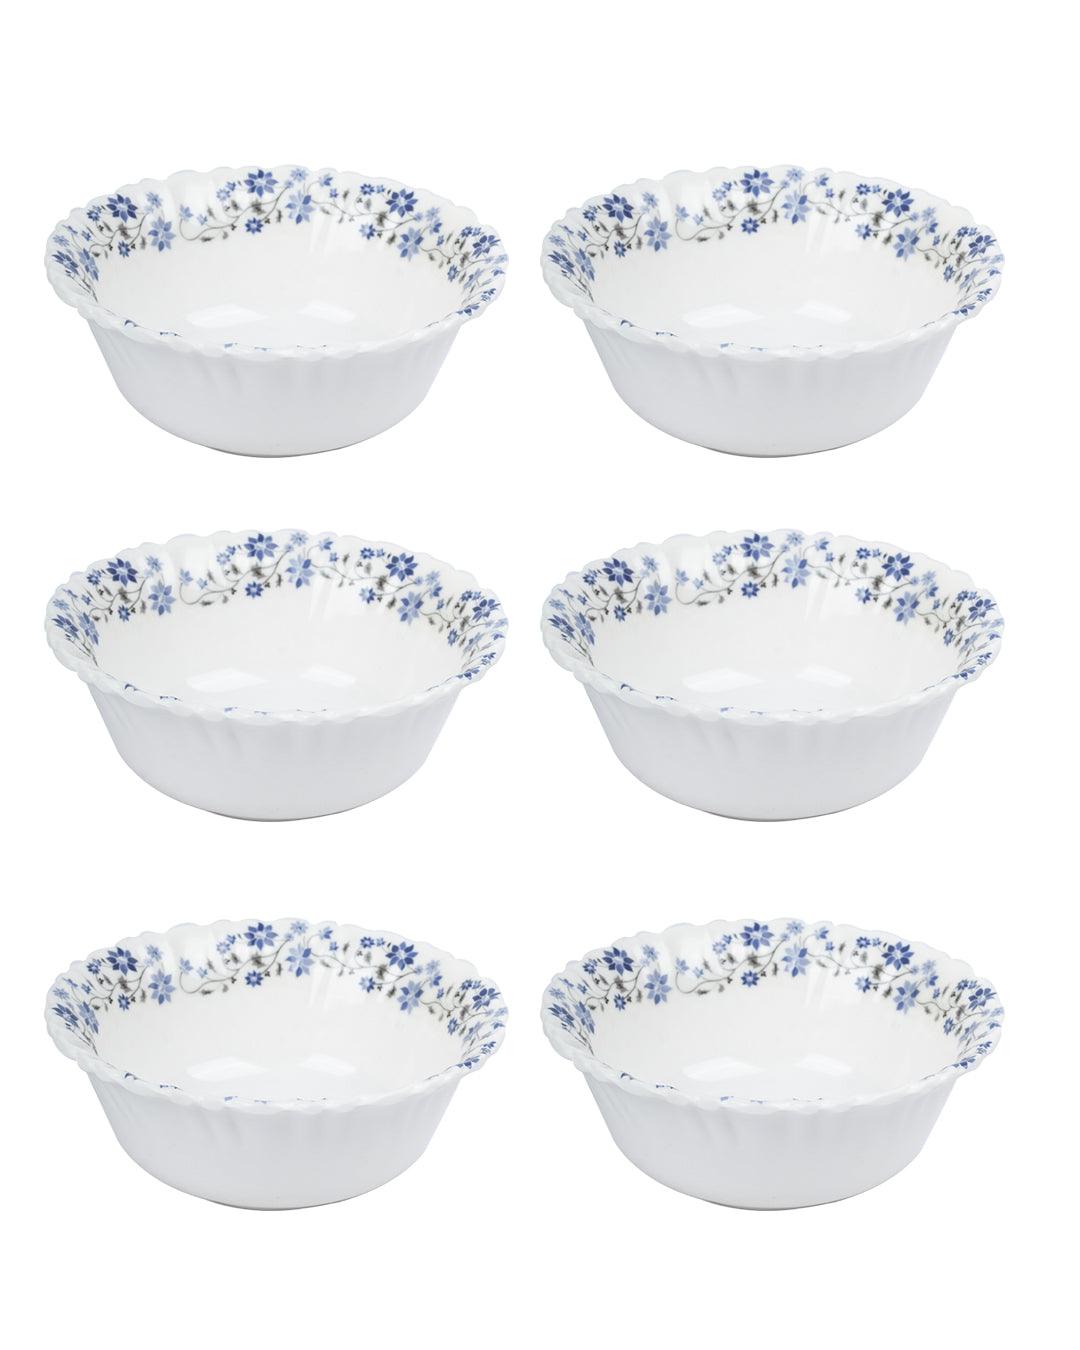 Market 99 Tableware Melamine Glossy Floral Finish Soup Bowls for Dining Table ( Set Of 6, 210 mL ) - MARKET 99